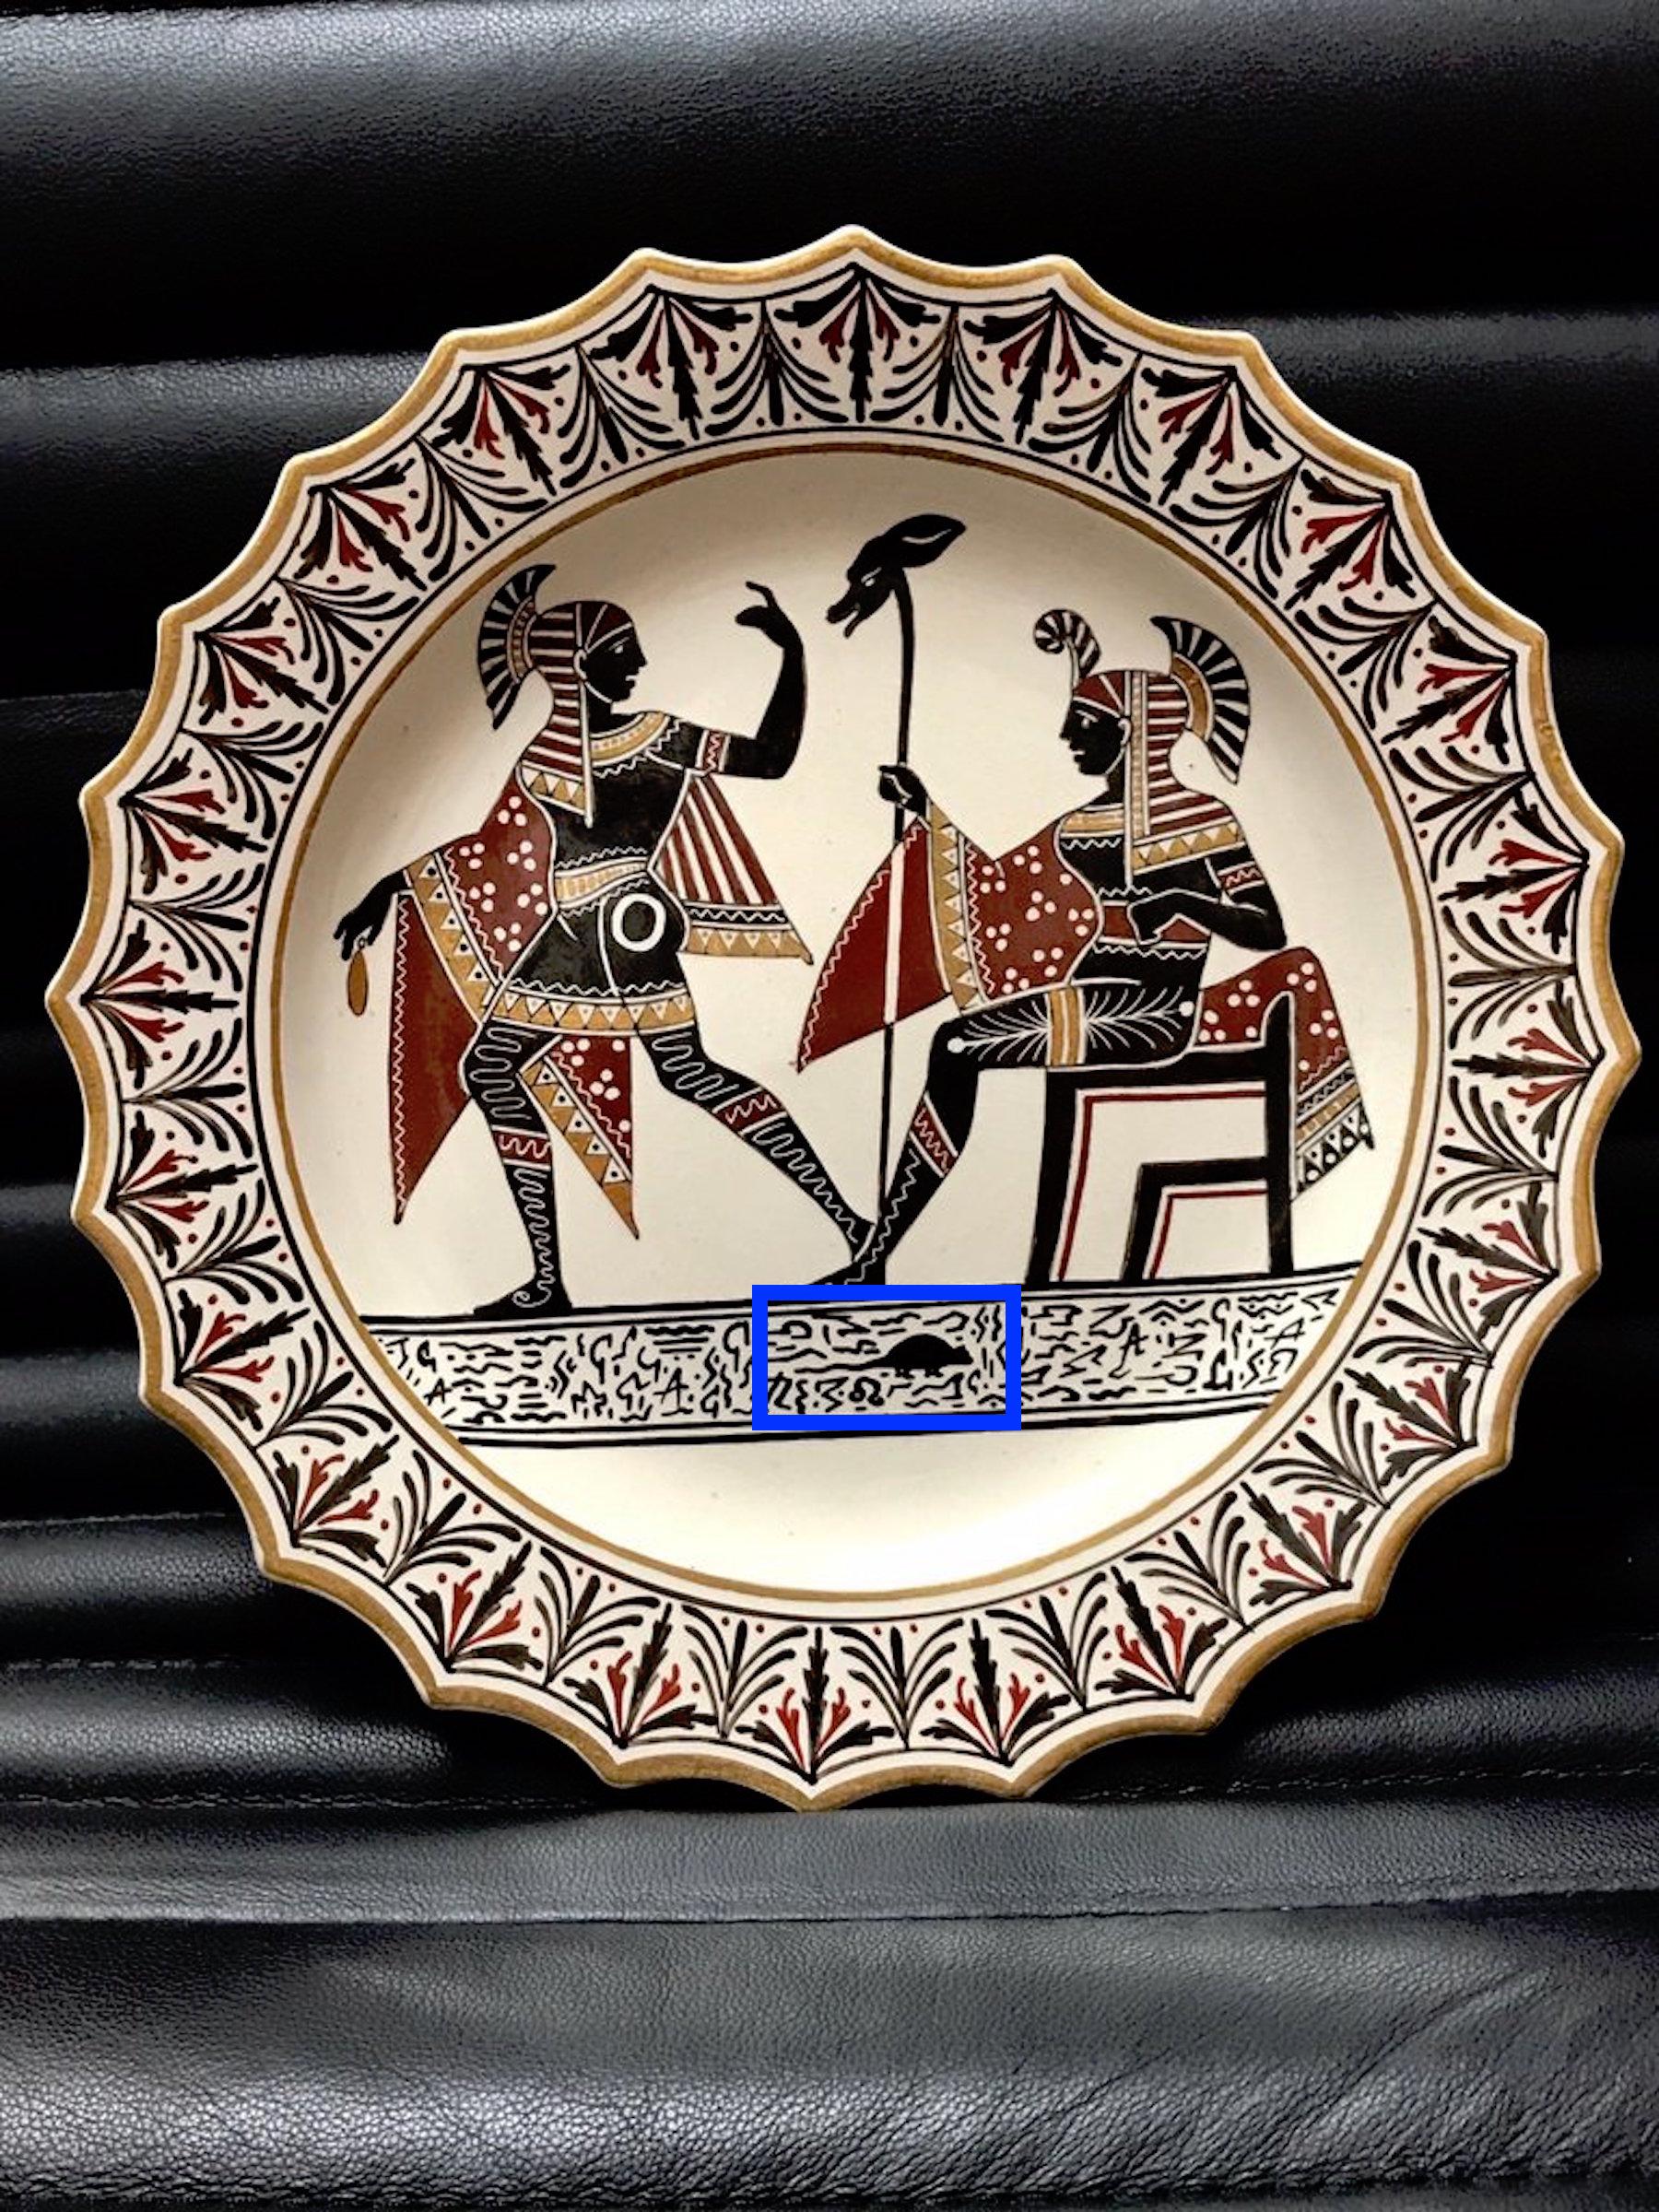 Giustiniani Egyptomania Pottery plate with gilt highlights, and a central Rodent
Neapolitan manufacture (Biagio Giustiniani & Sons) dated to 1830-1840
19th century, impressed script Giustiniani, and other characters.
 